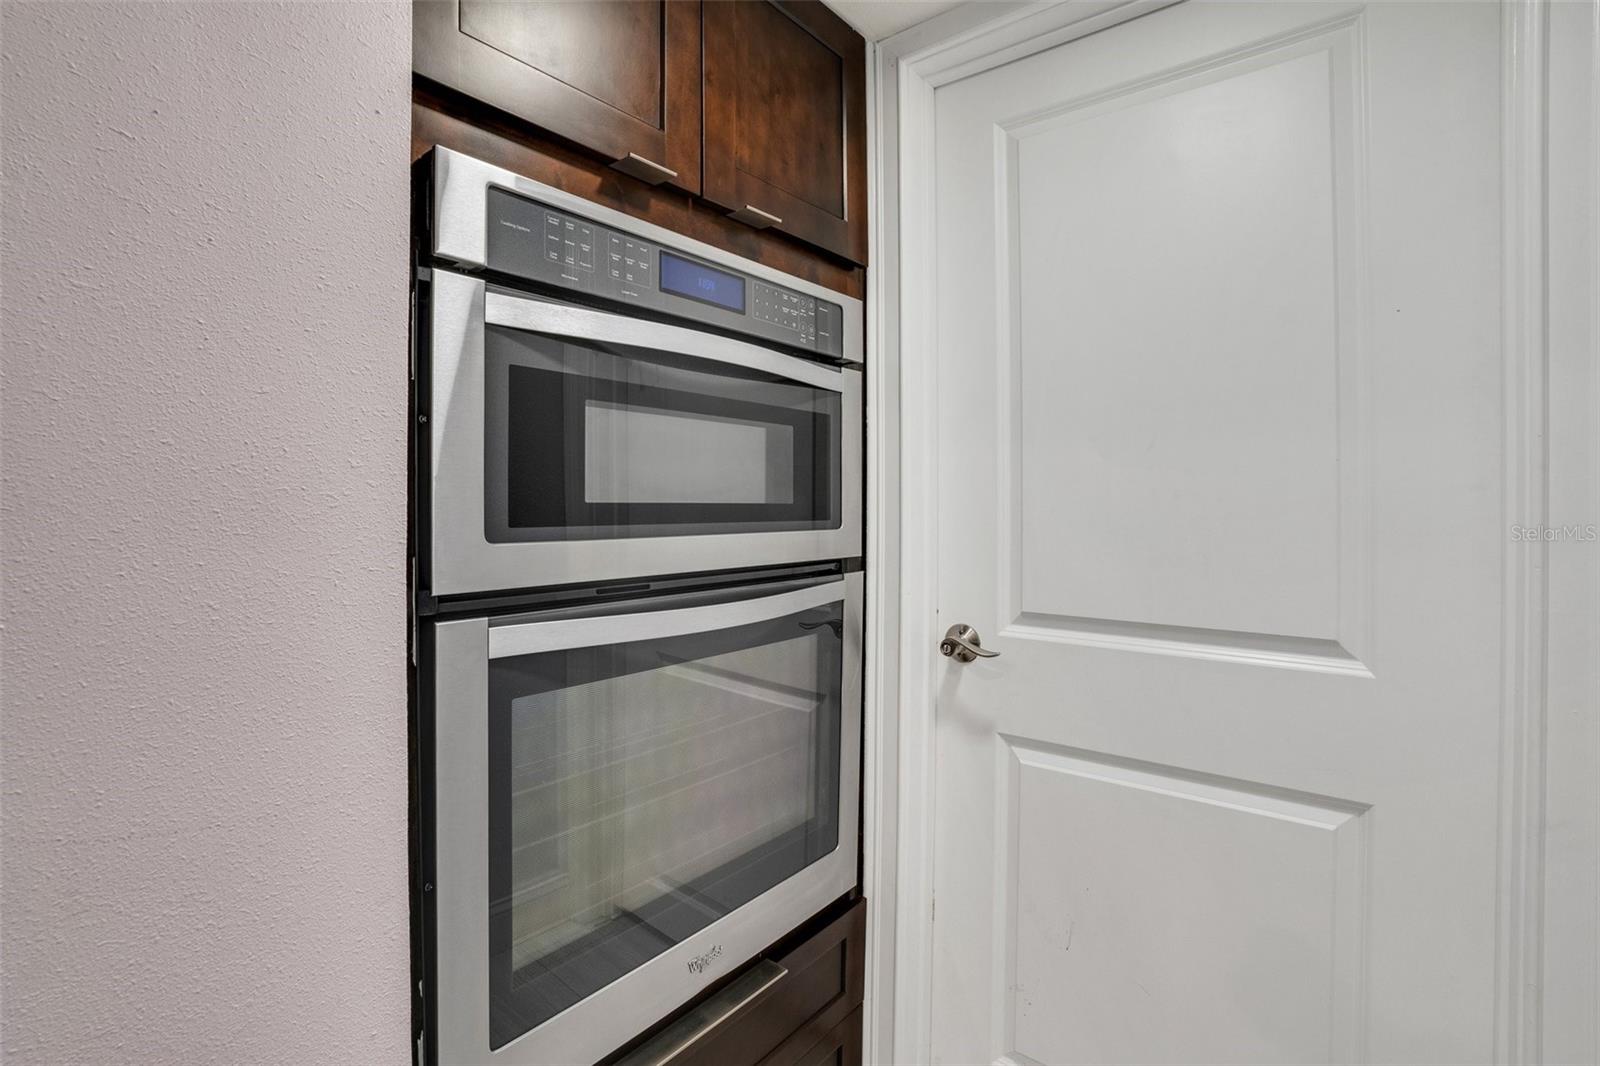 Nicely hidden Convection Microwave and Oven